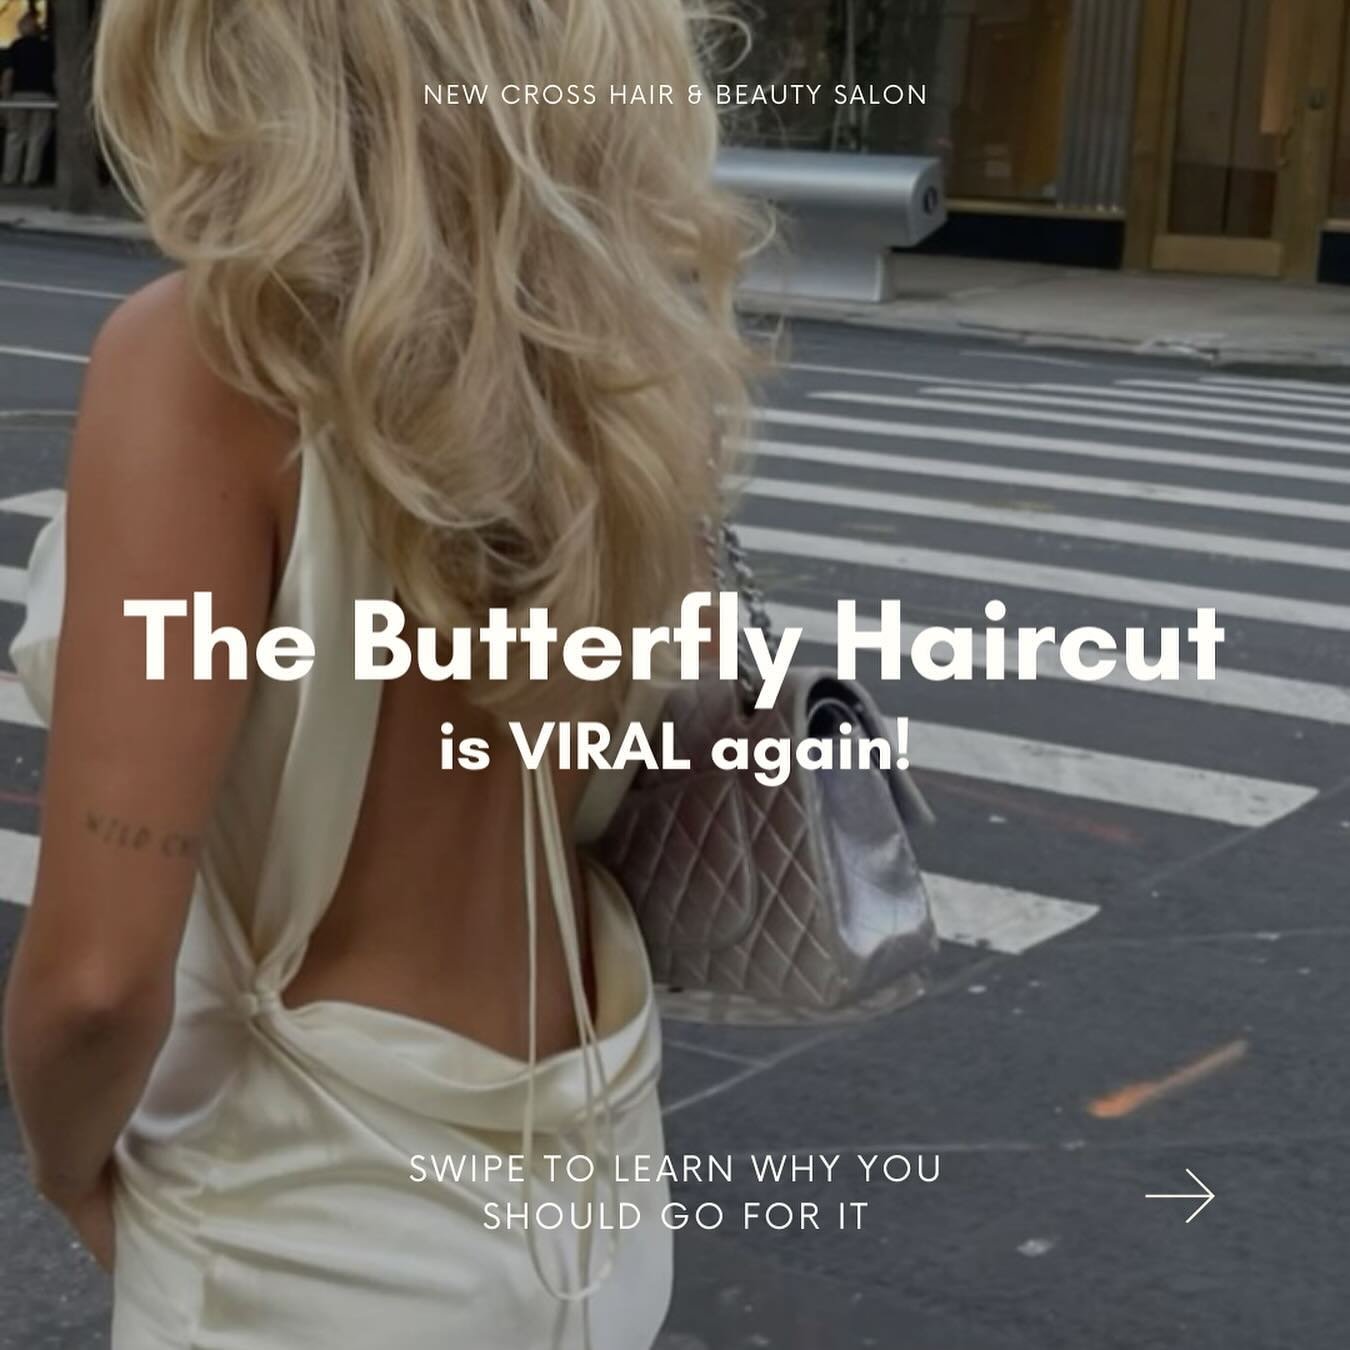 Who&rsquo;d love to try the viral butterfly haircut? 🦋 This is your sign since the long layers are viral again 😏💙